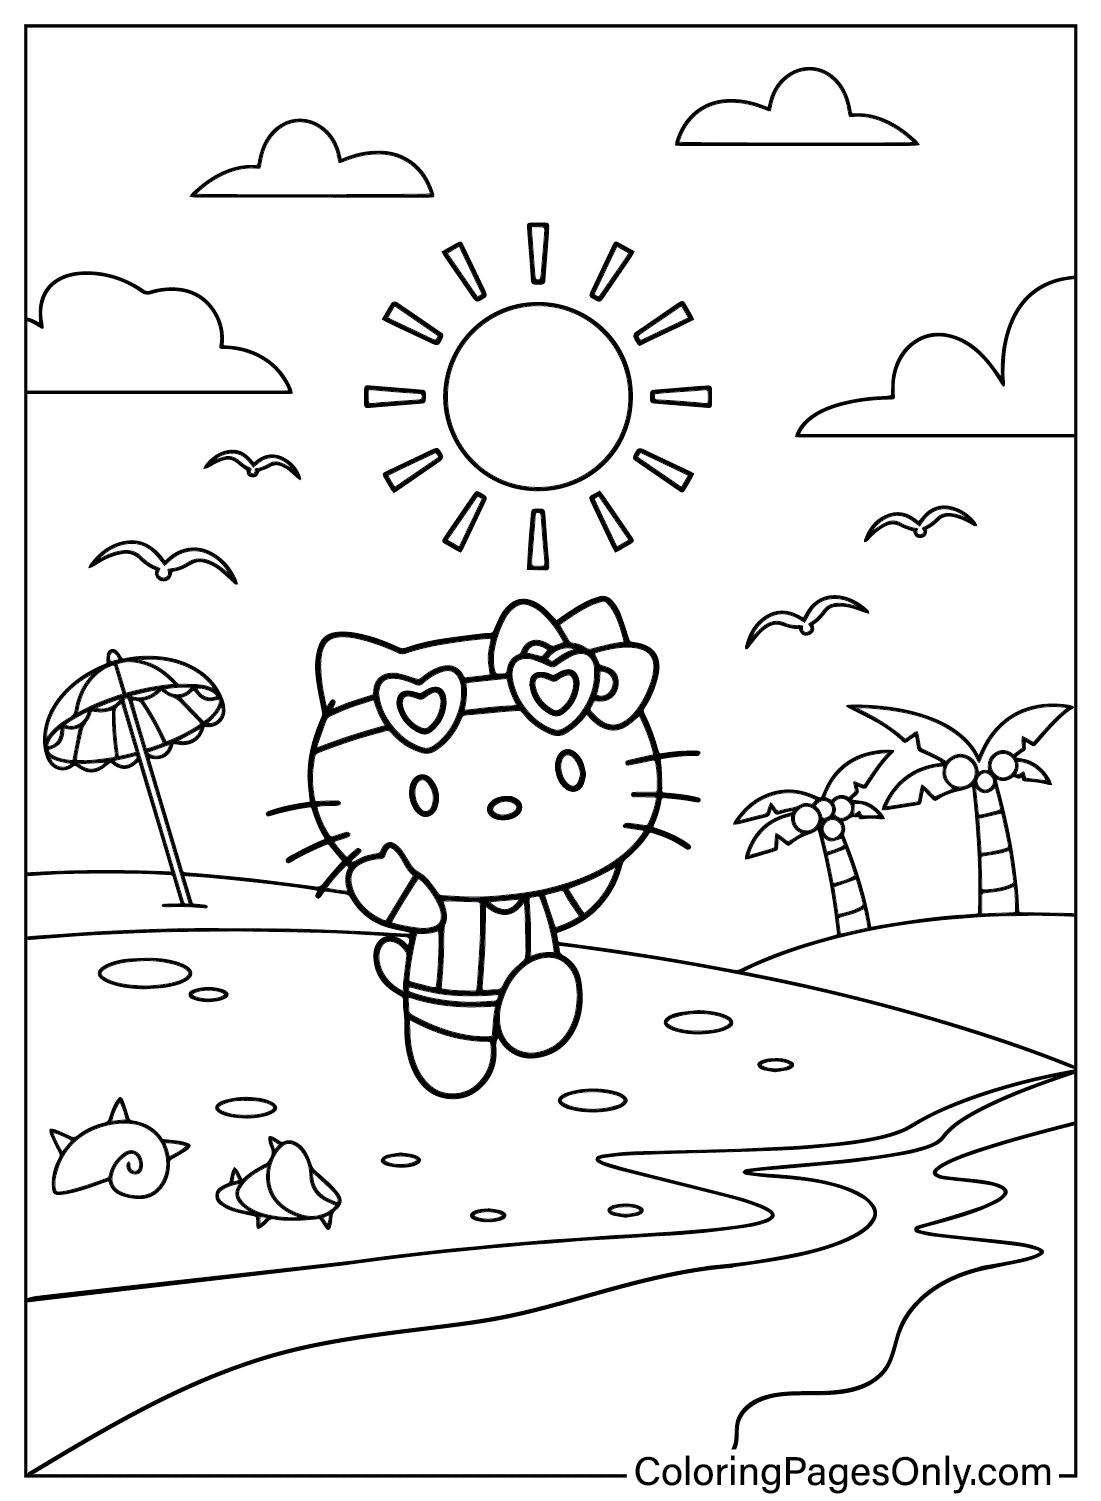 Free Hello Kitty Coloring Page